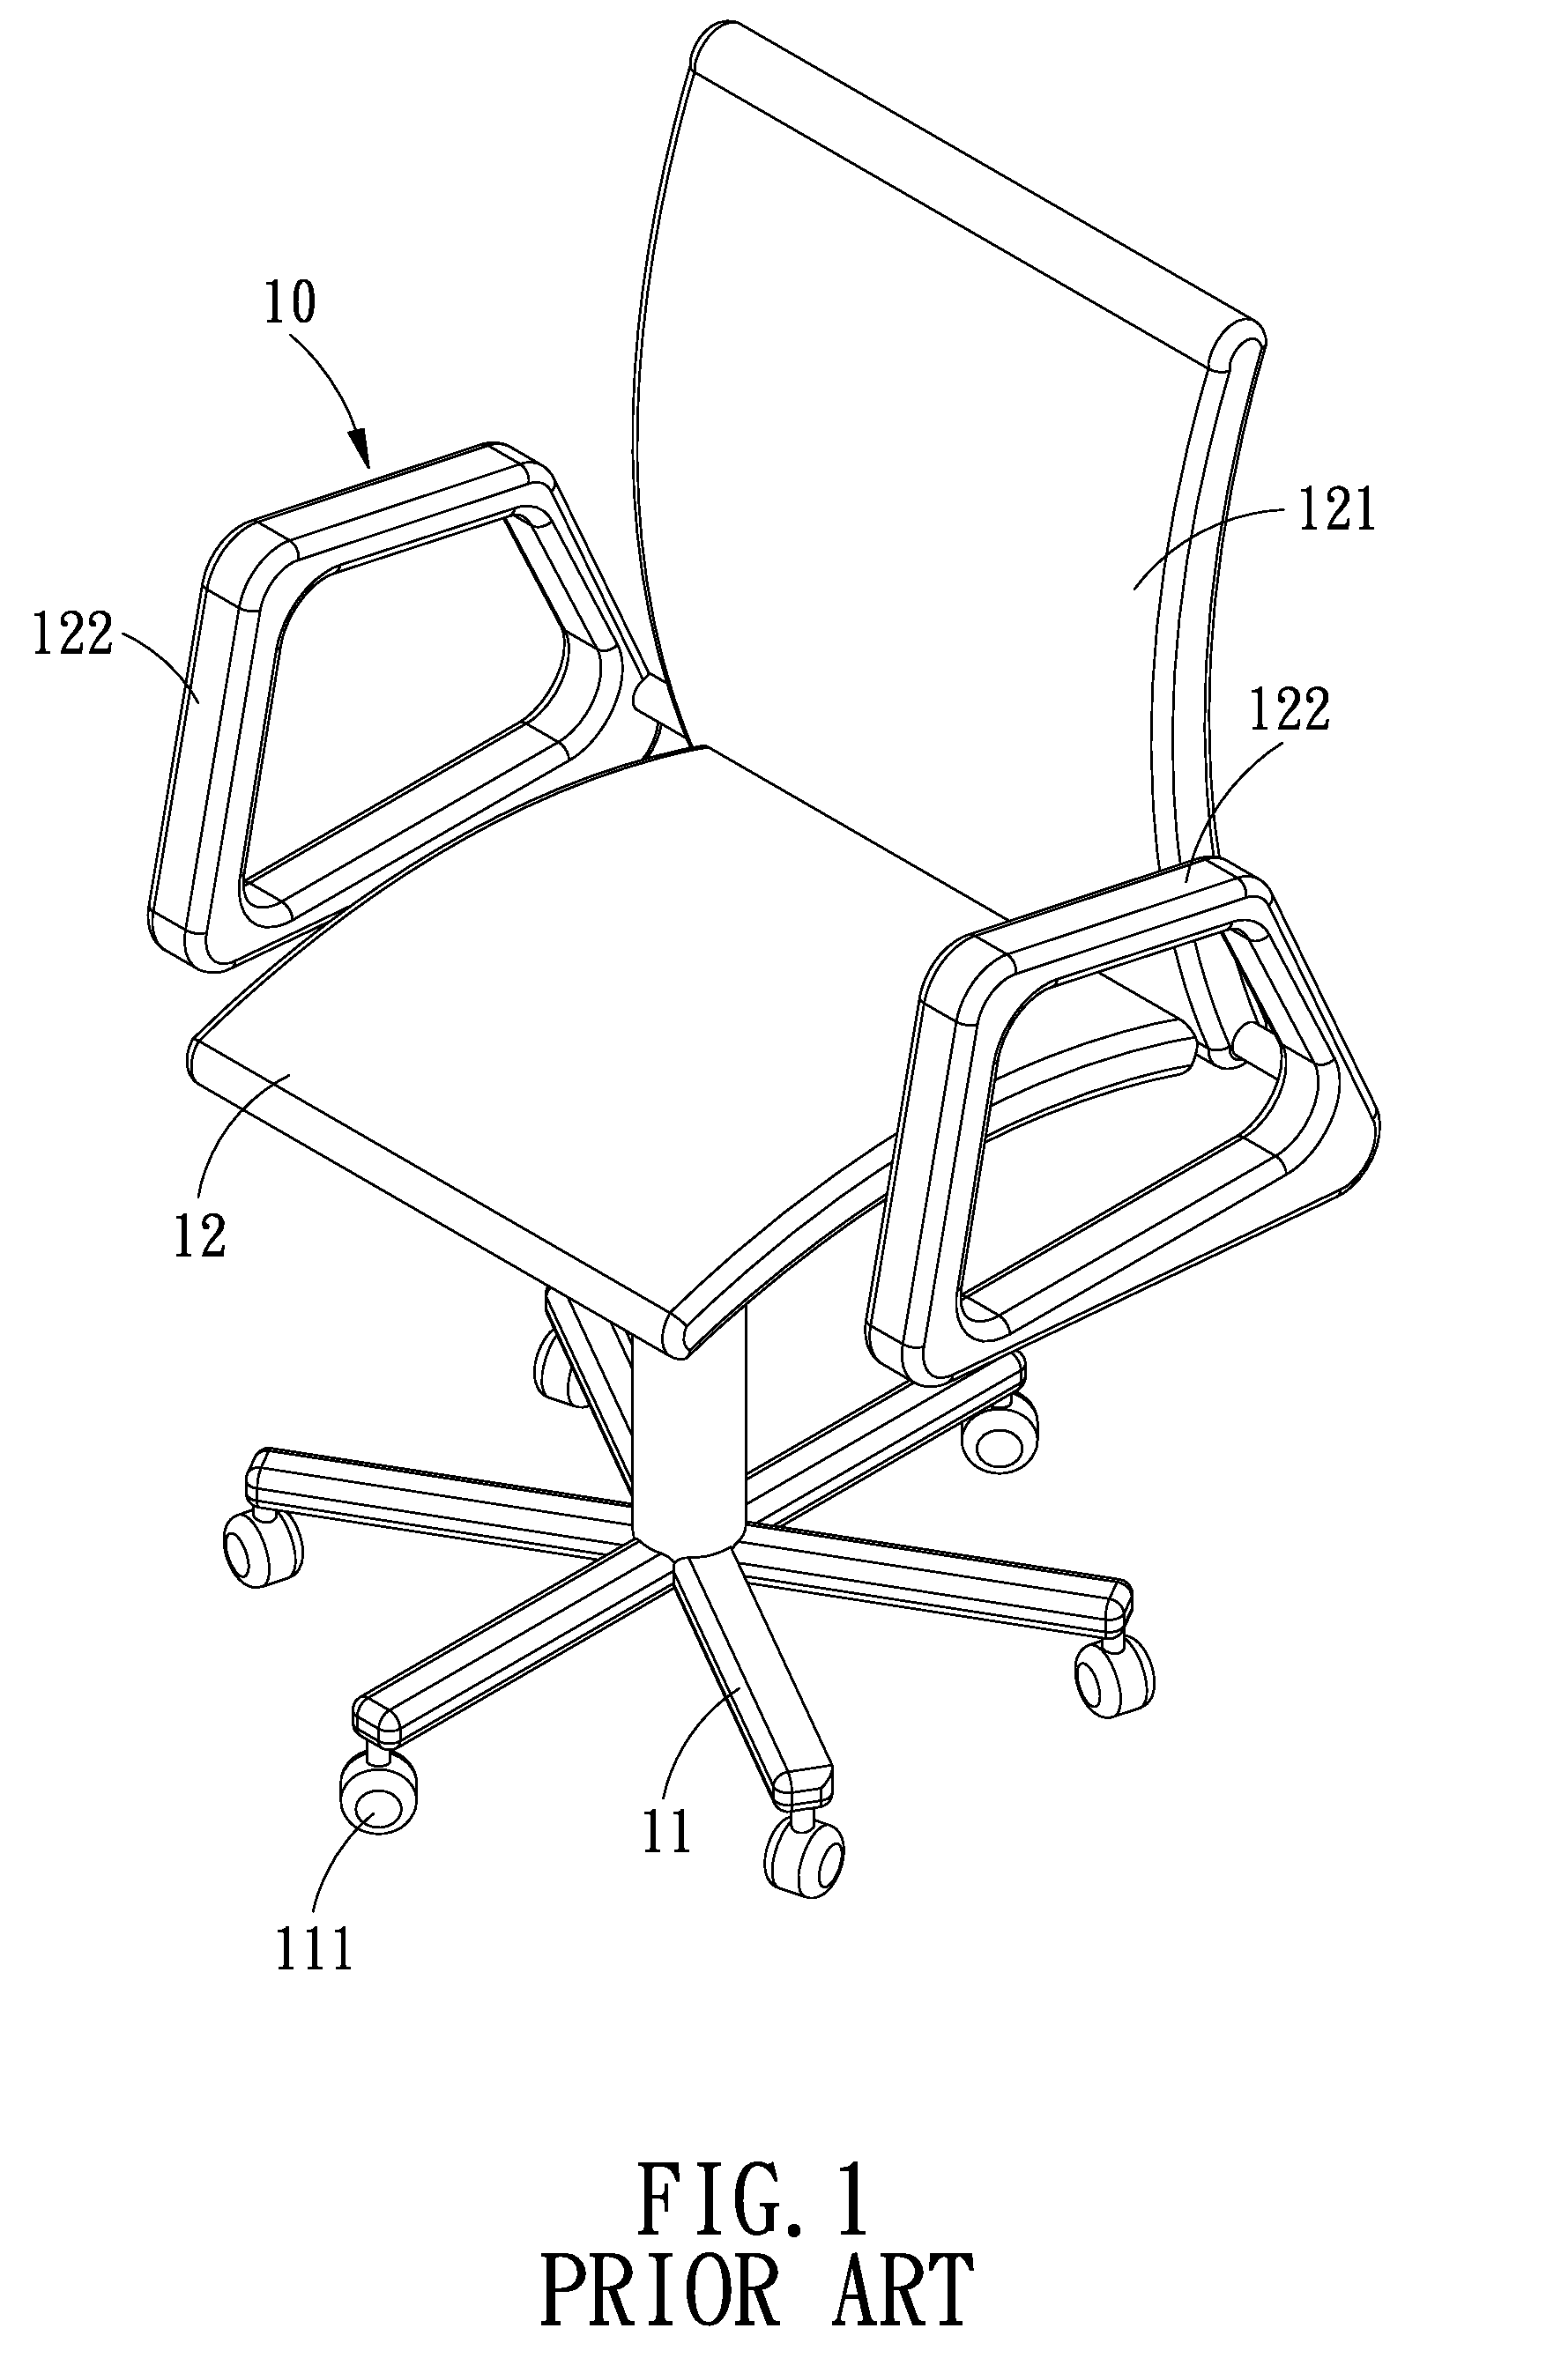 Chair with a hip-shaping seat